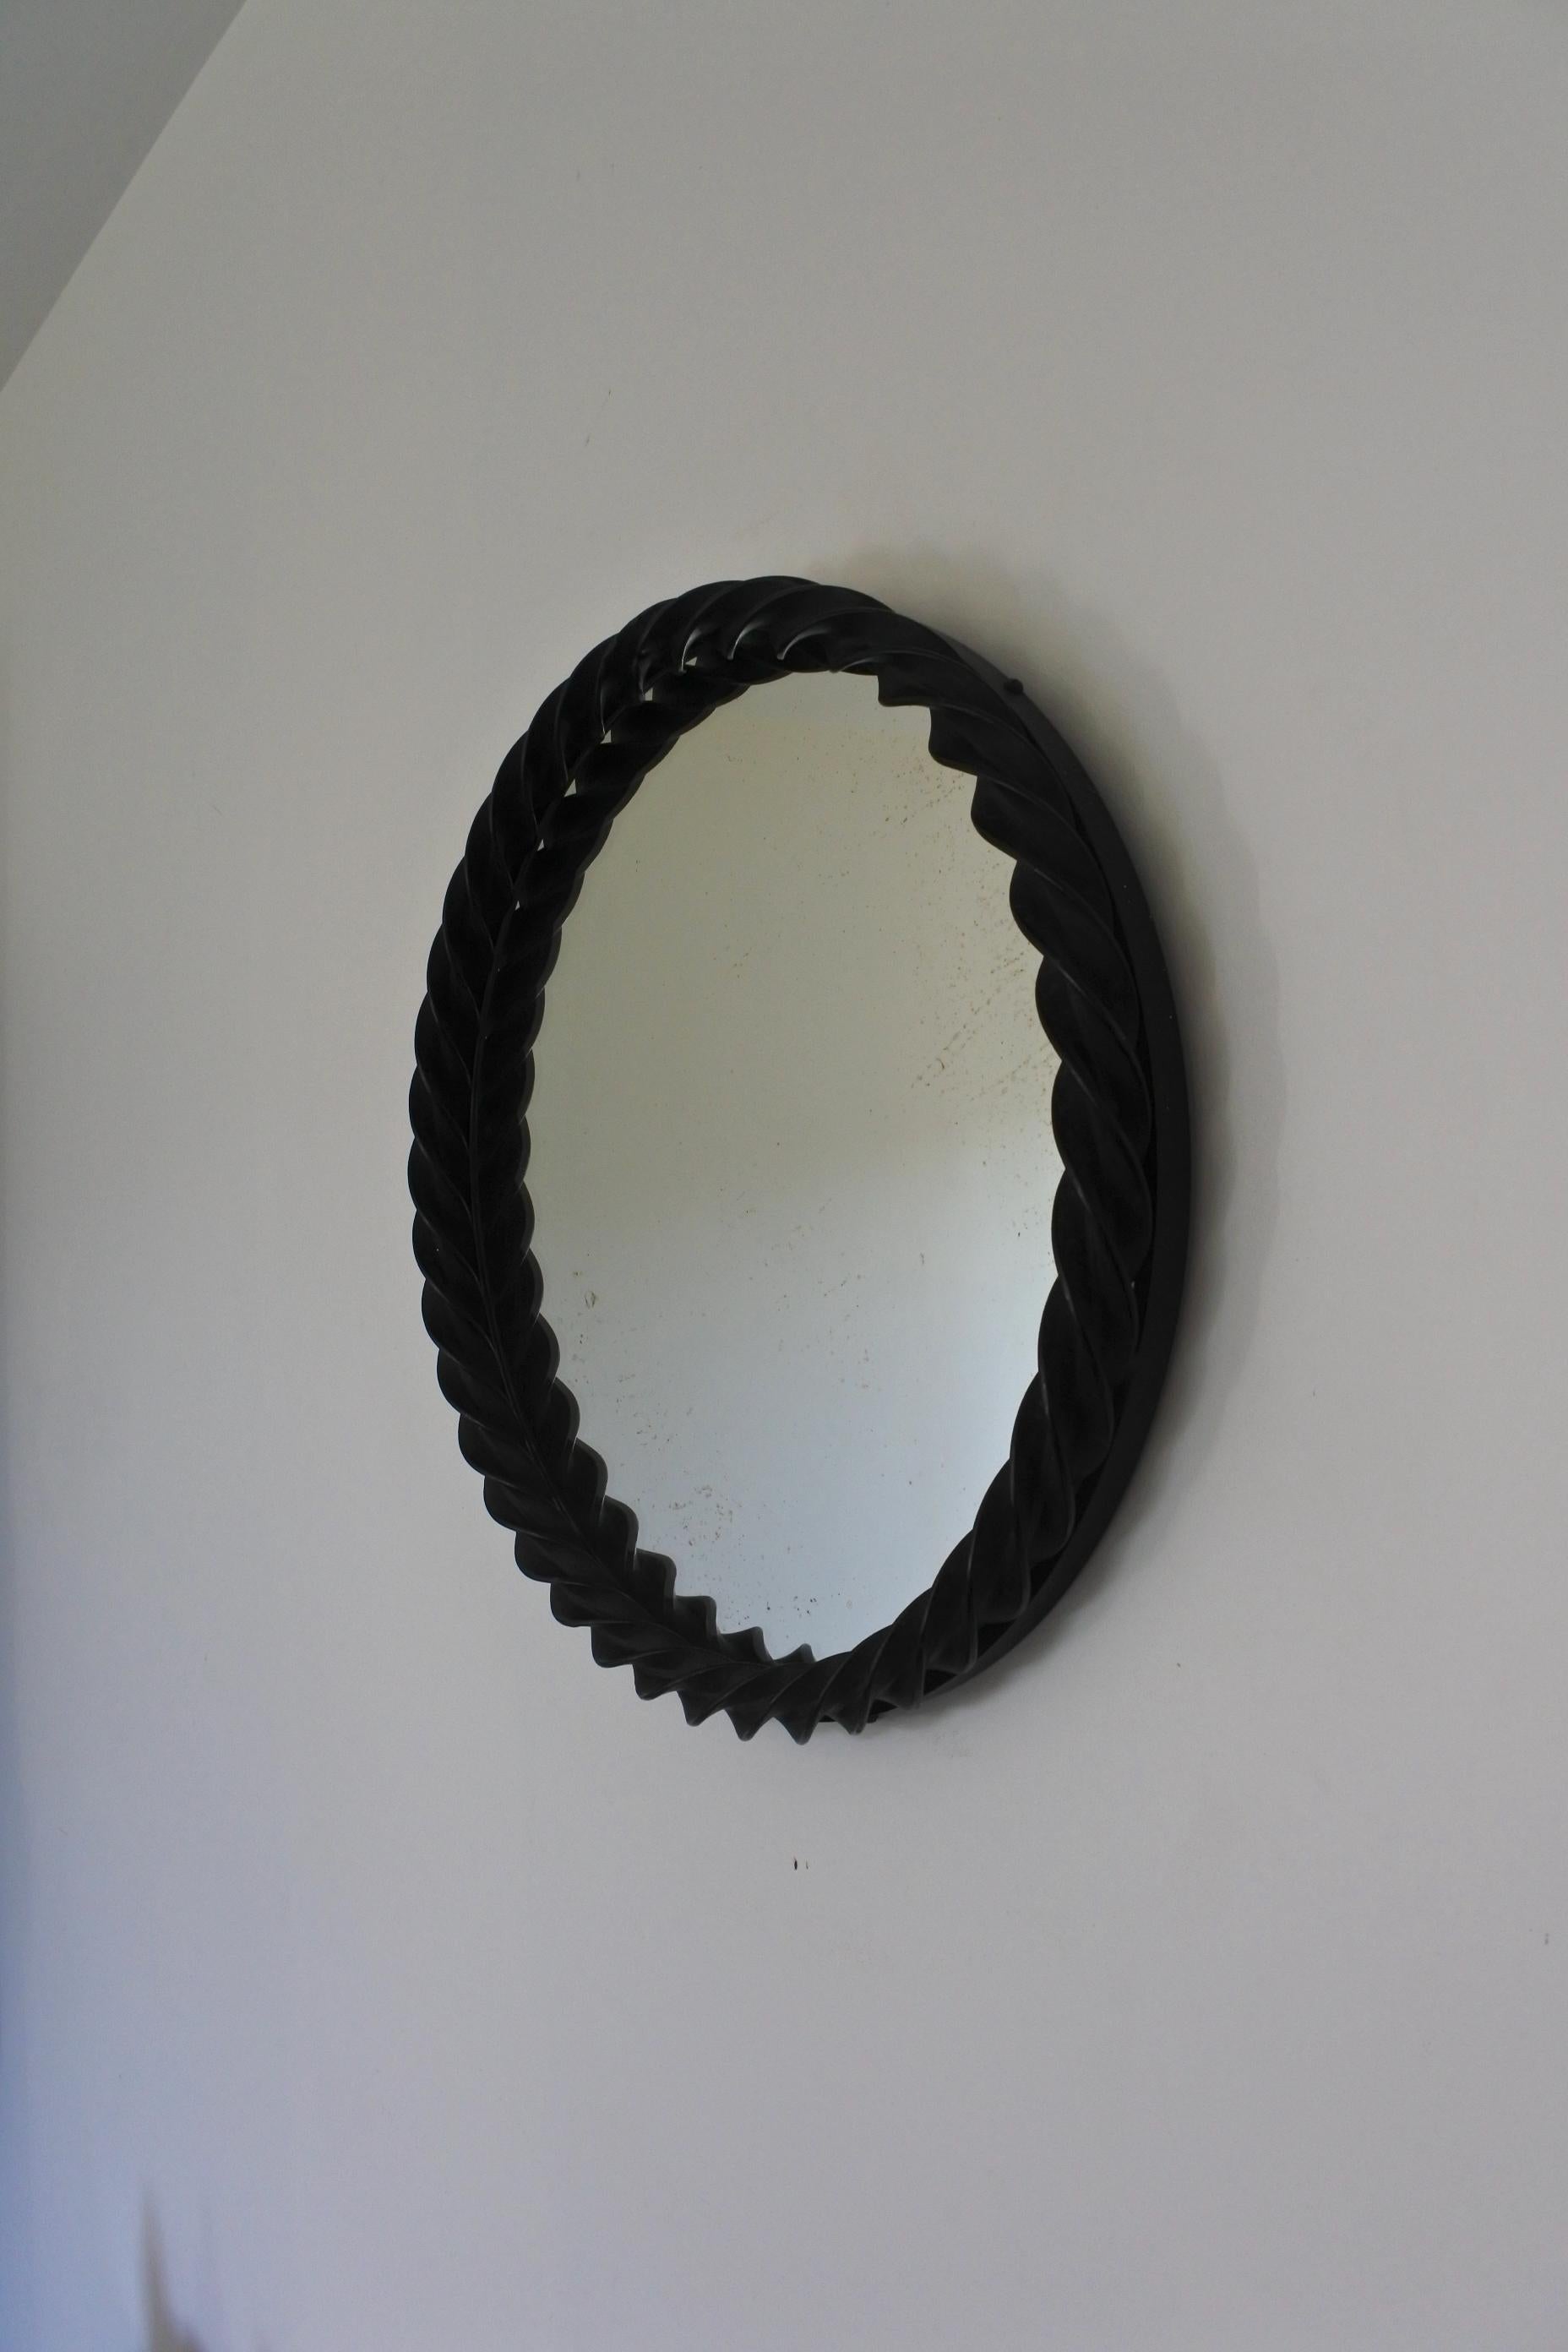 Very decorative 1940s mirror from France
Wrought iron crafted mirror in excellent condition.